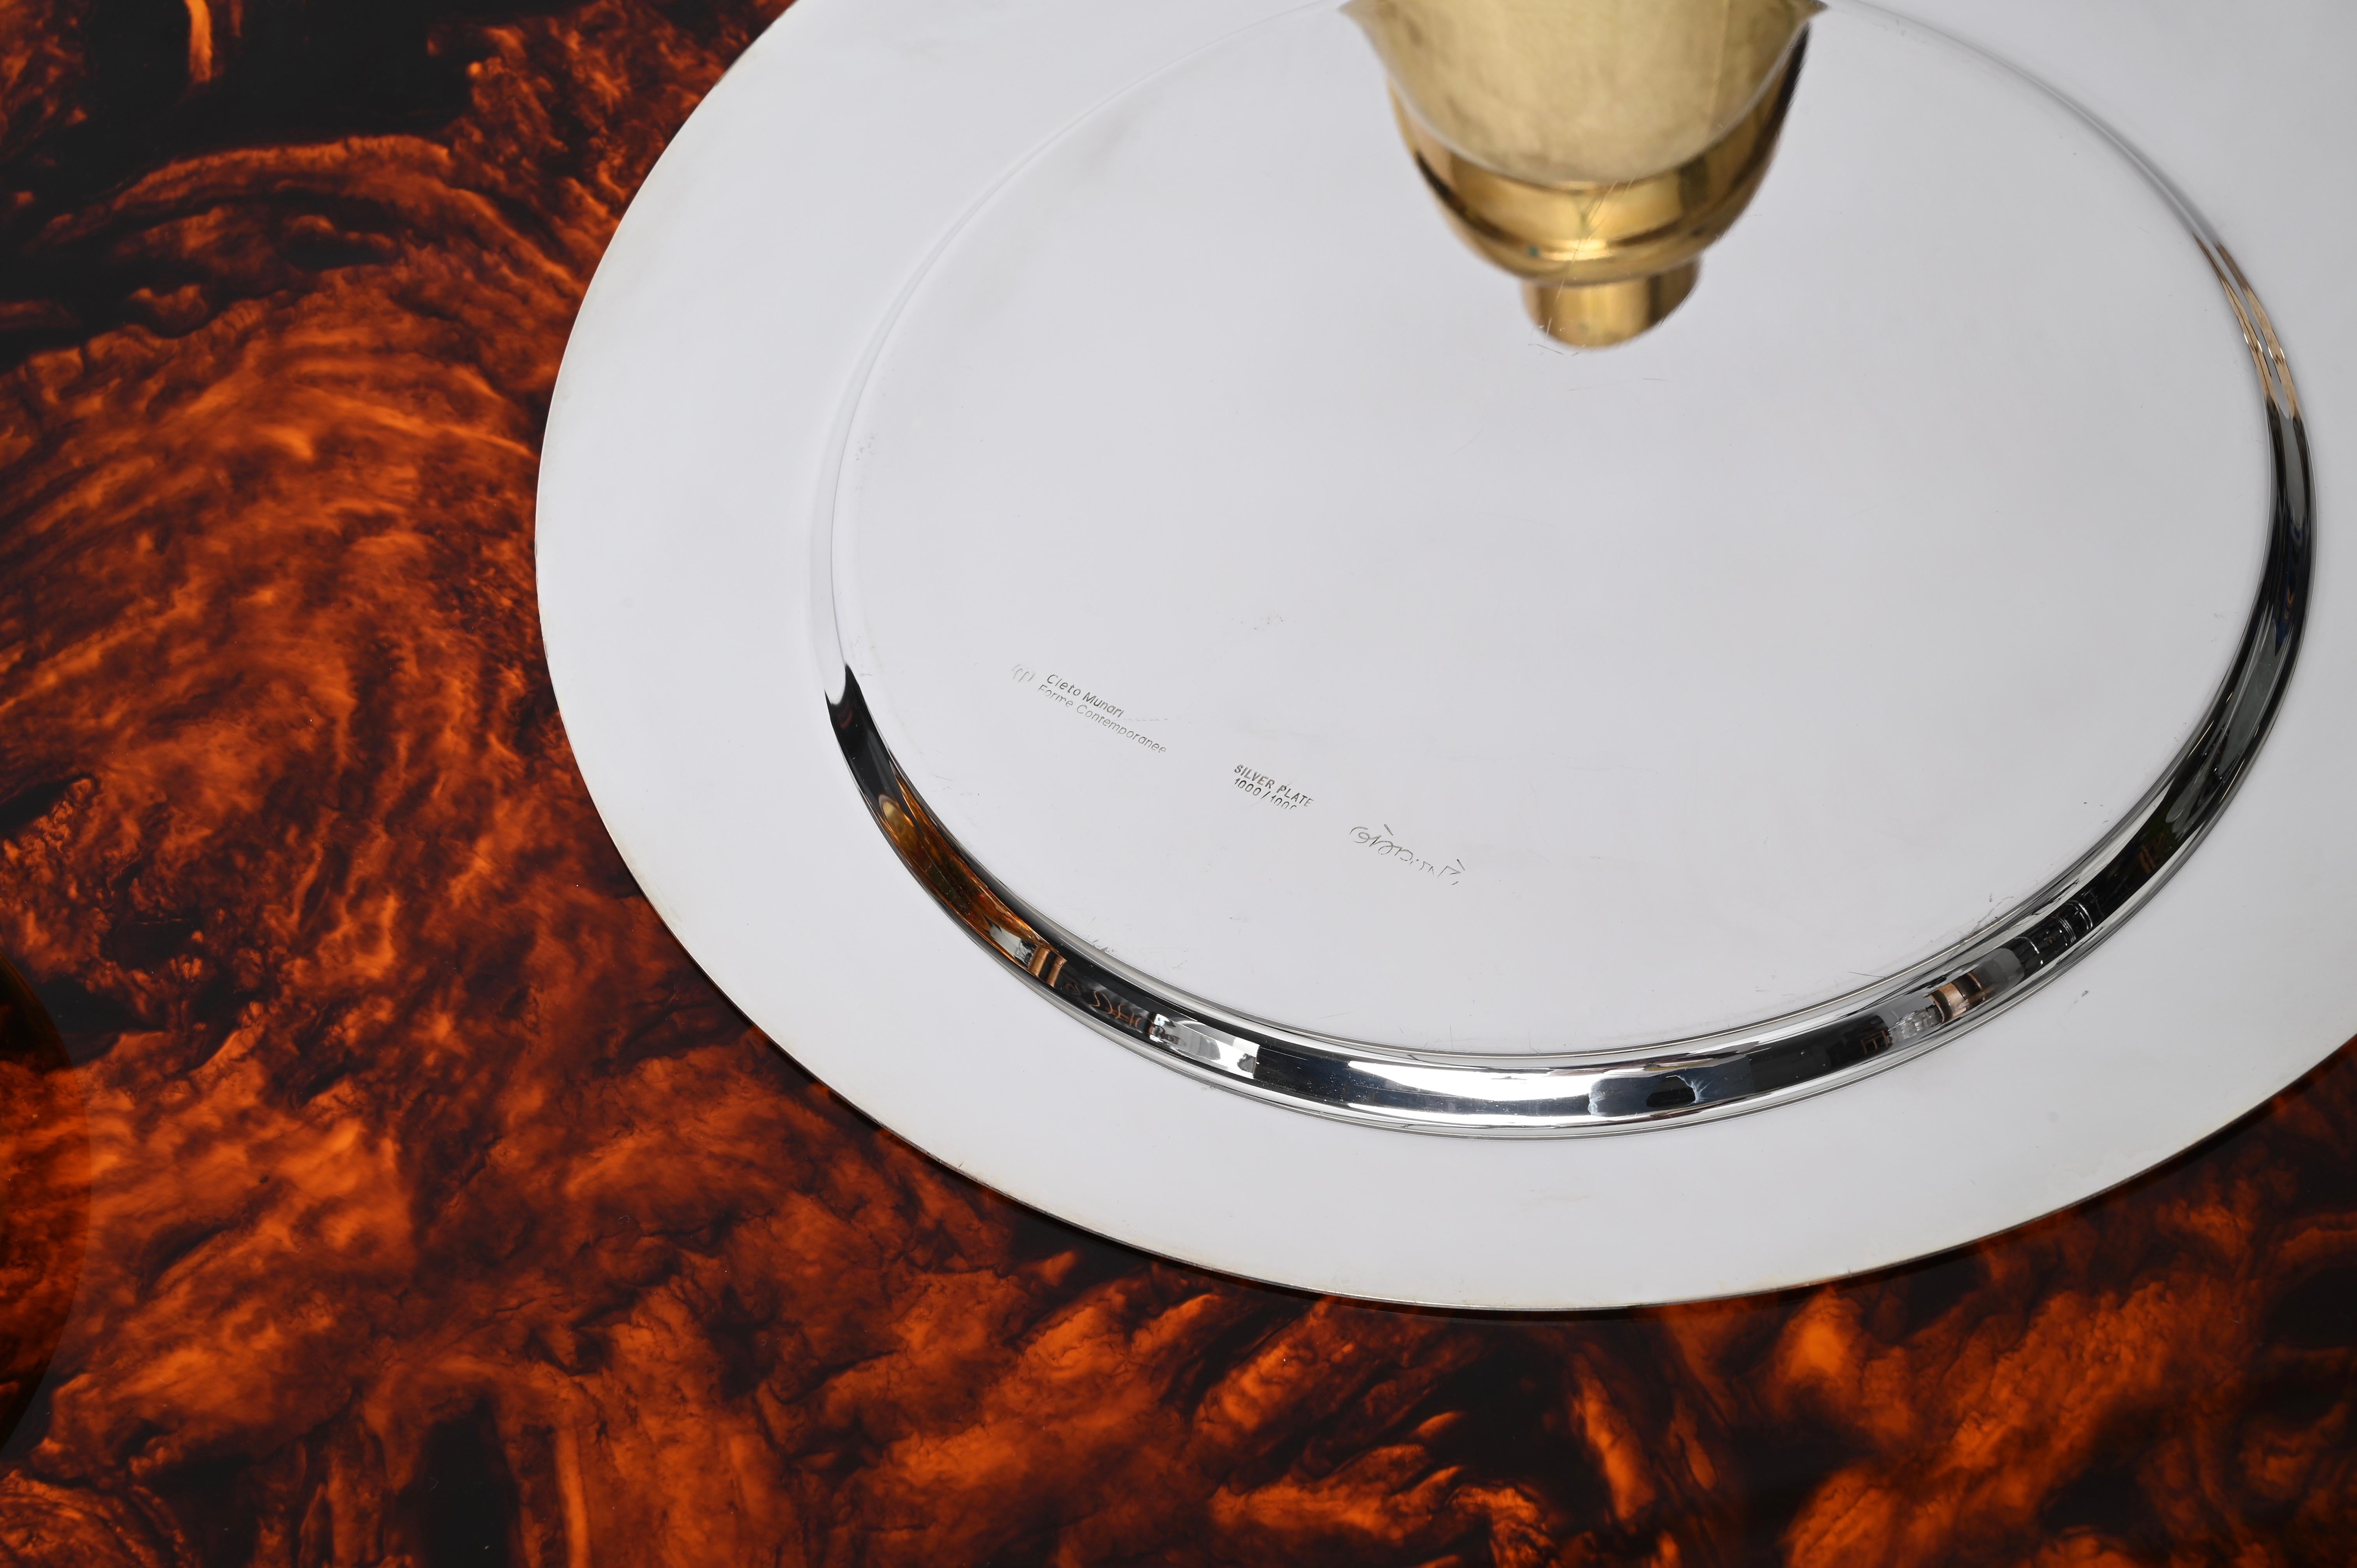 Gio Ponti for Cleto Munari Modernist Silver Plated Serving Plate Italy, 1980s For Sale 7